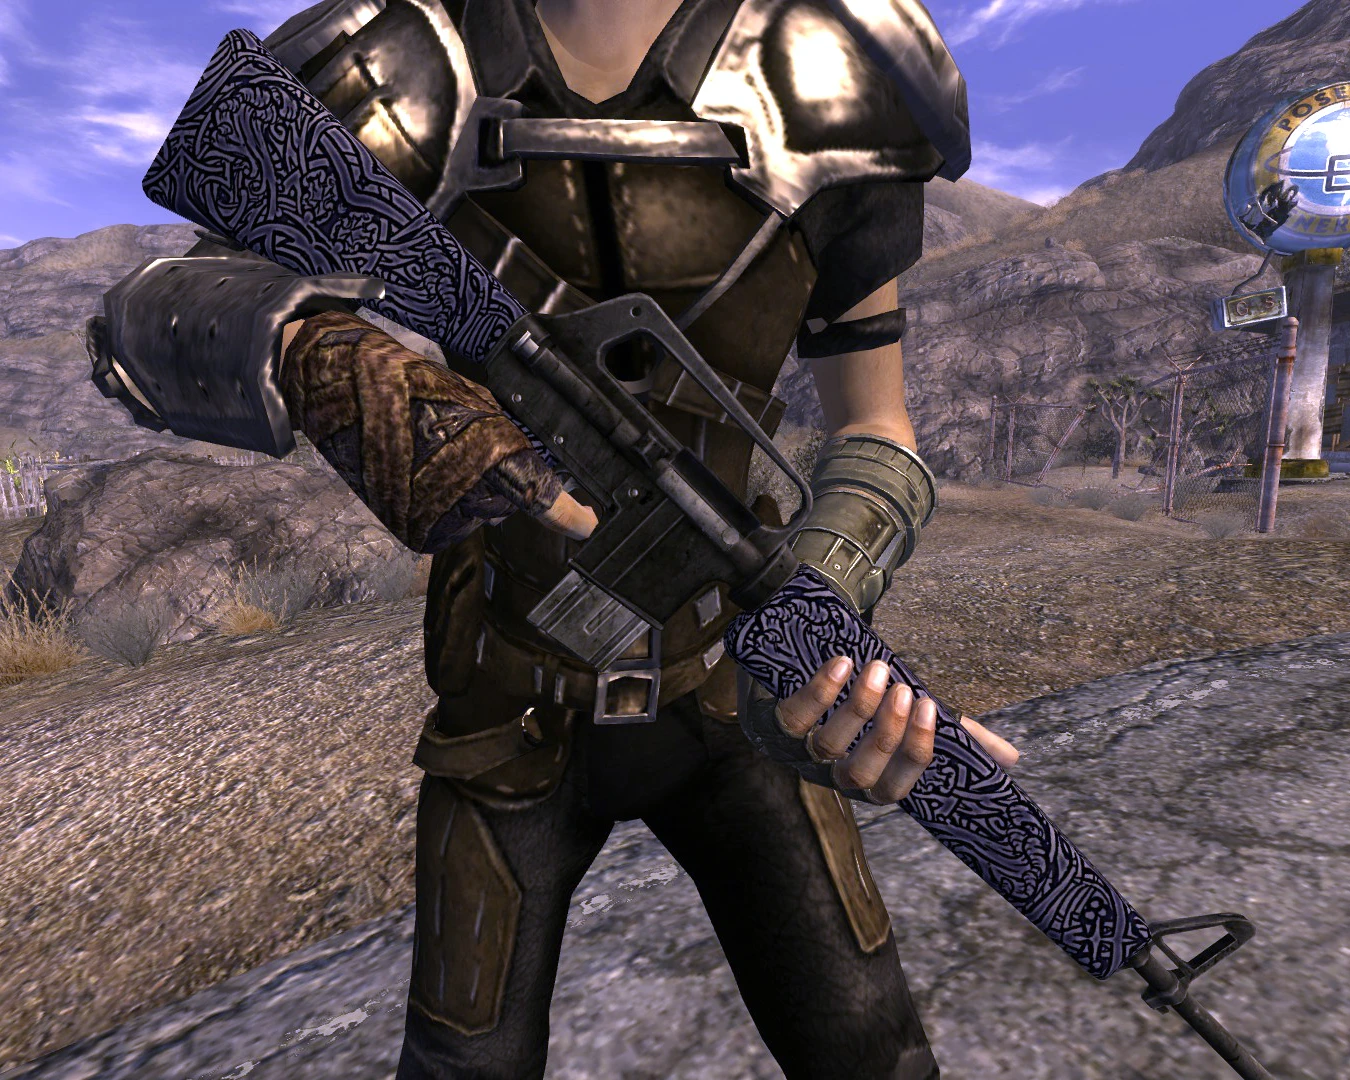 Fallout new sfw. Service Rifle Fallout New Vegas. Рюкзаки фоллаут Нью Вегас. Fallout New Vegas мод service Rifle. Броня уцелевшего Fallout New Vegas.